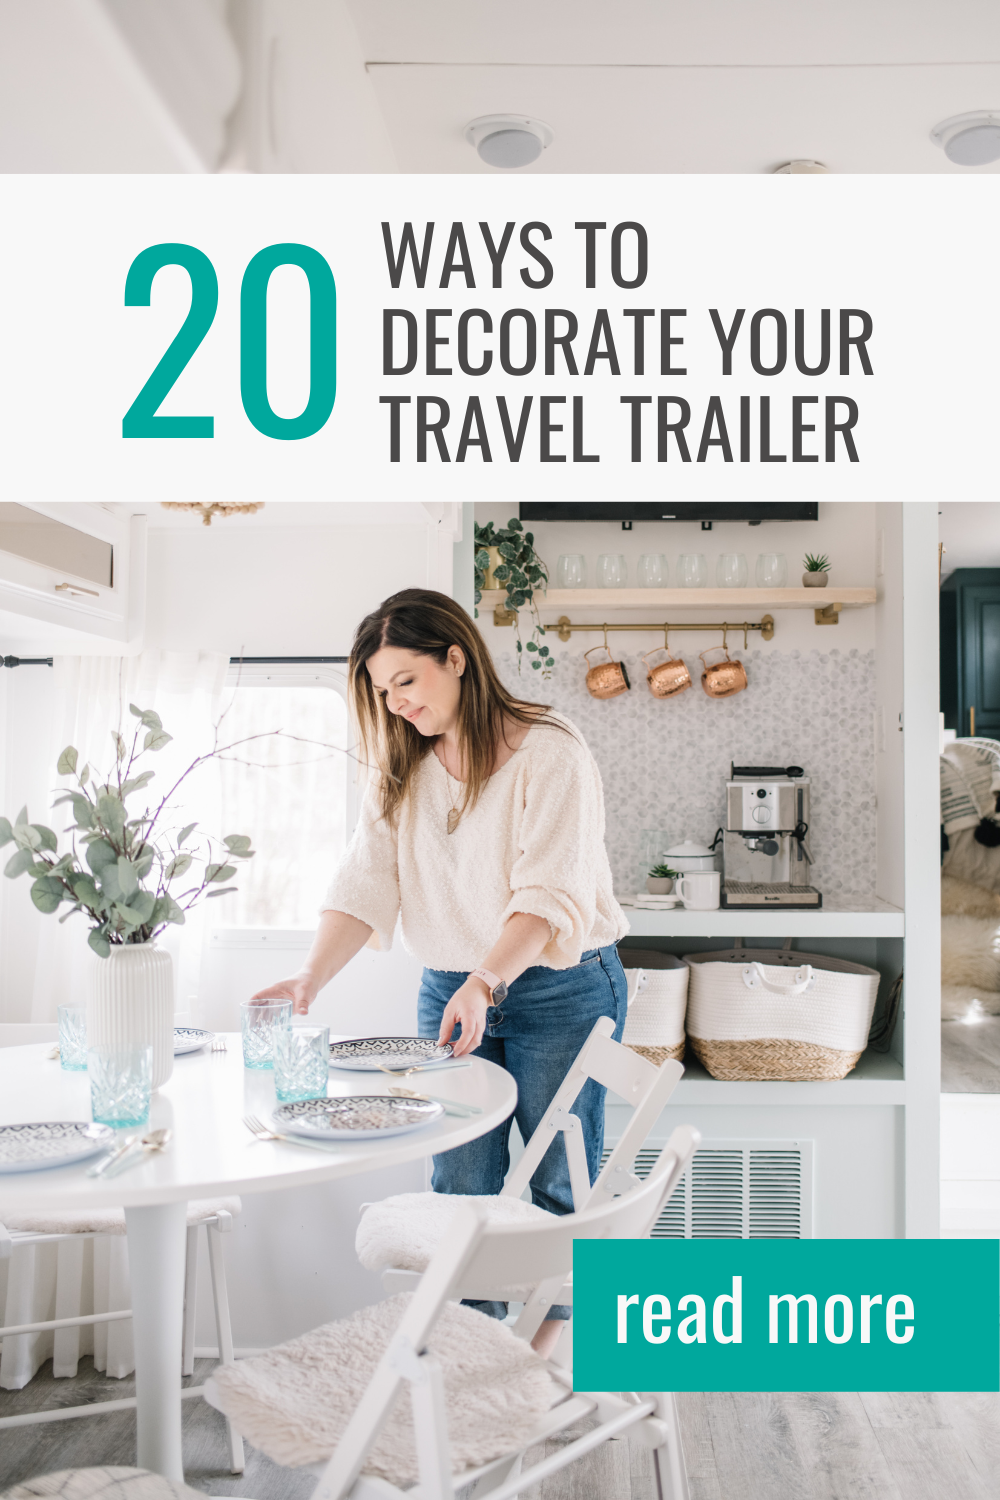 Here are 20 different ways that you can decorate your travel trailer or RV to make it feel more like home.